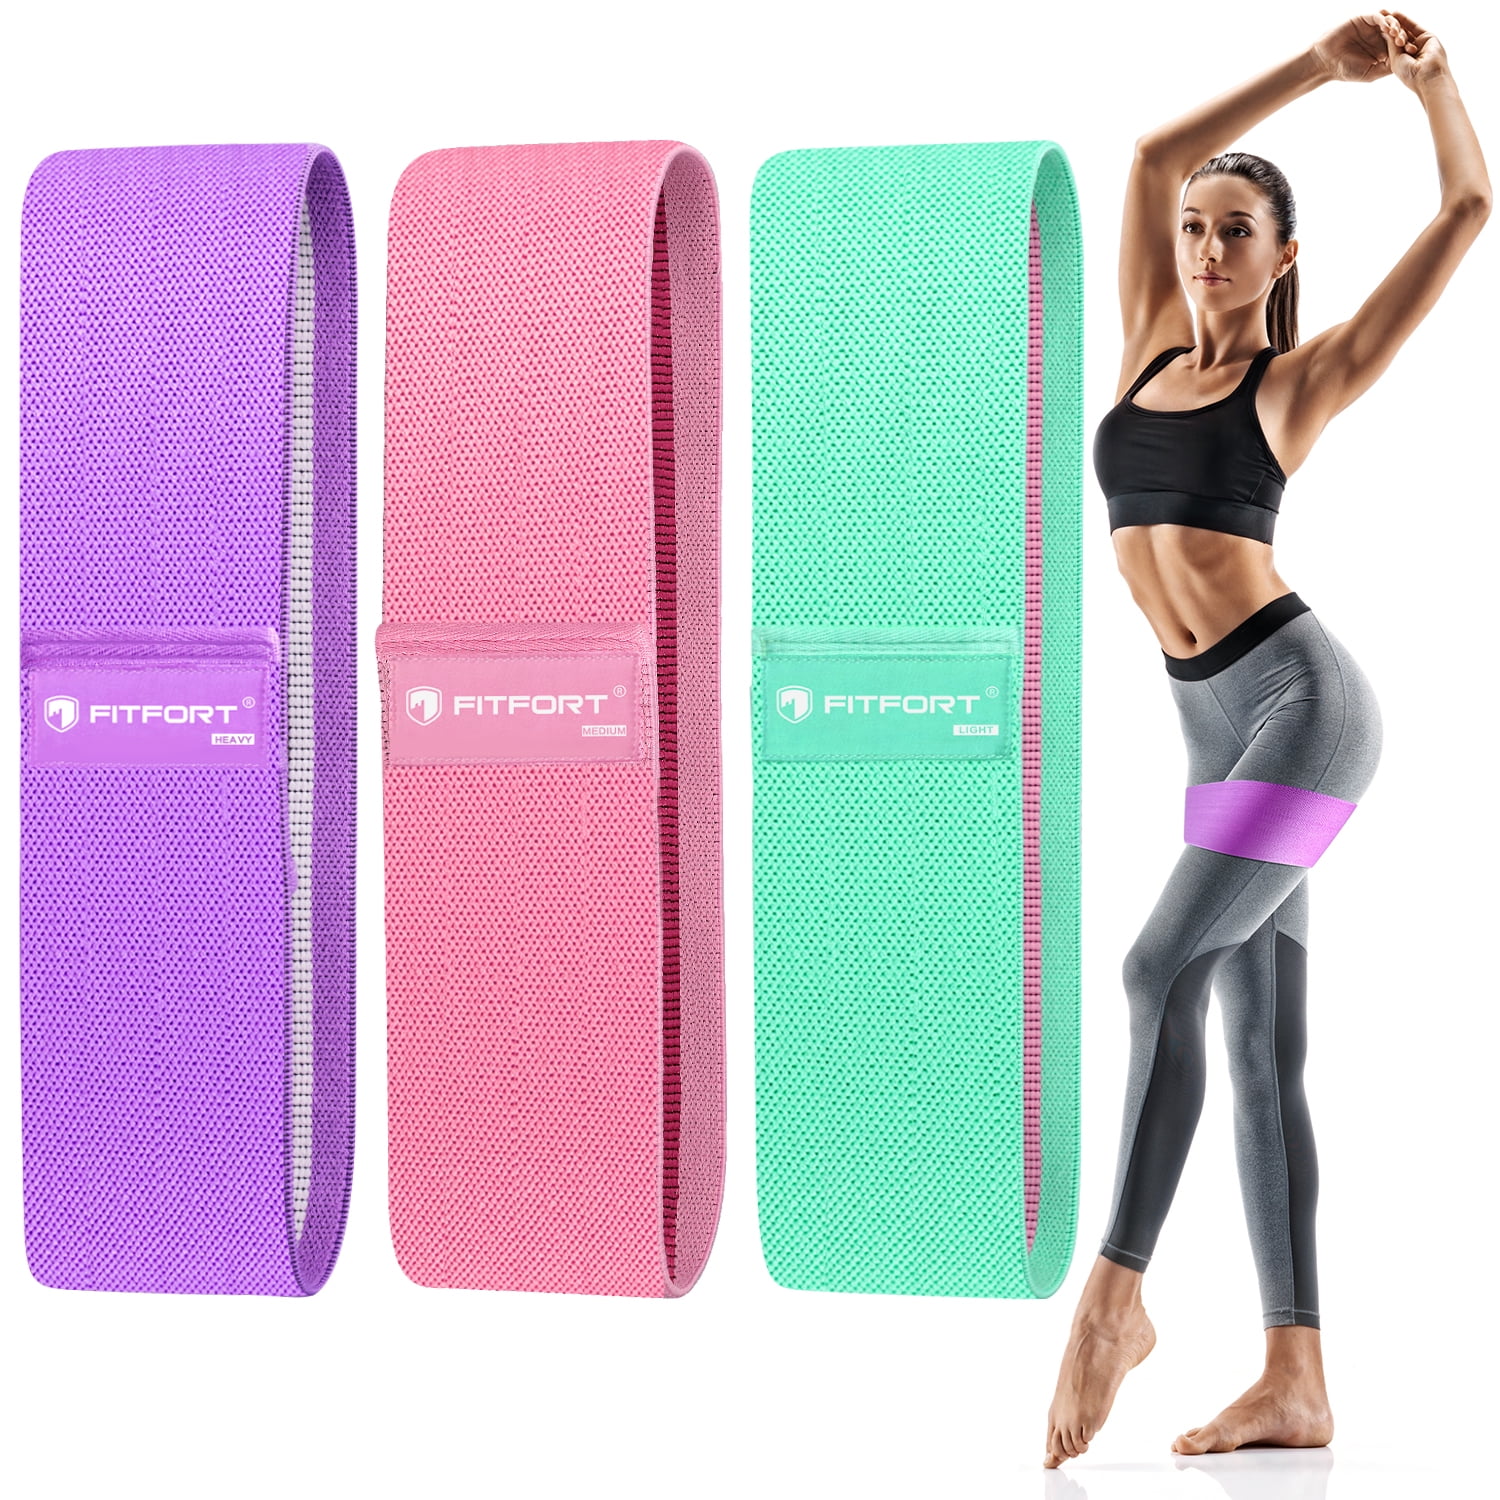 Fabric Booty Resistance Bands Set 3 Level Non-Slip Fitness Workout Loop Bands 